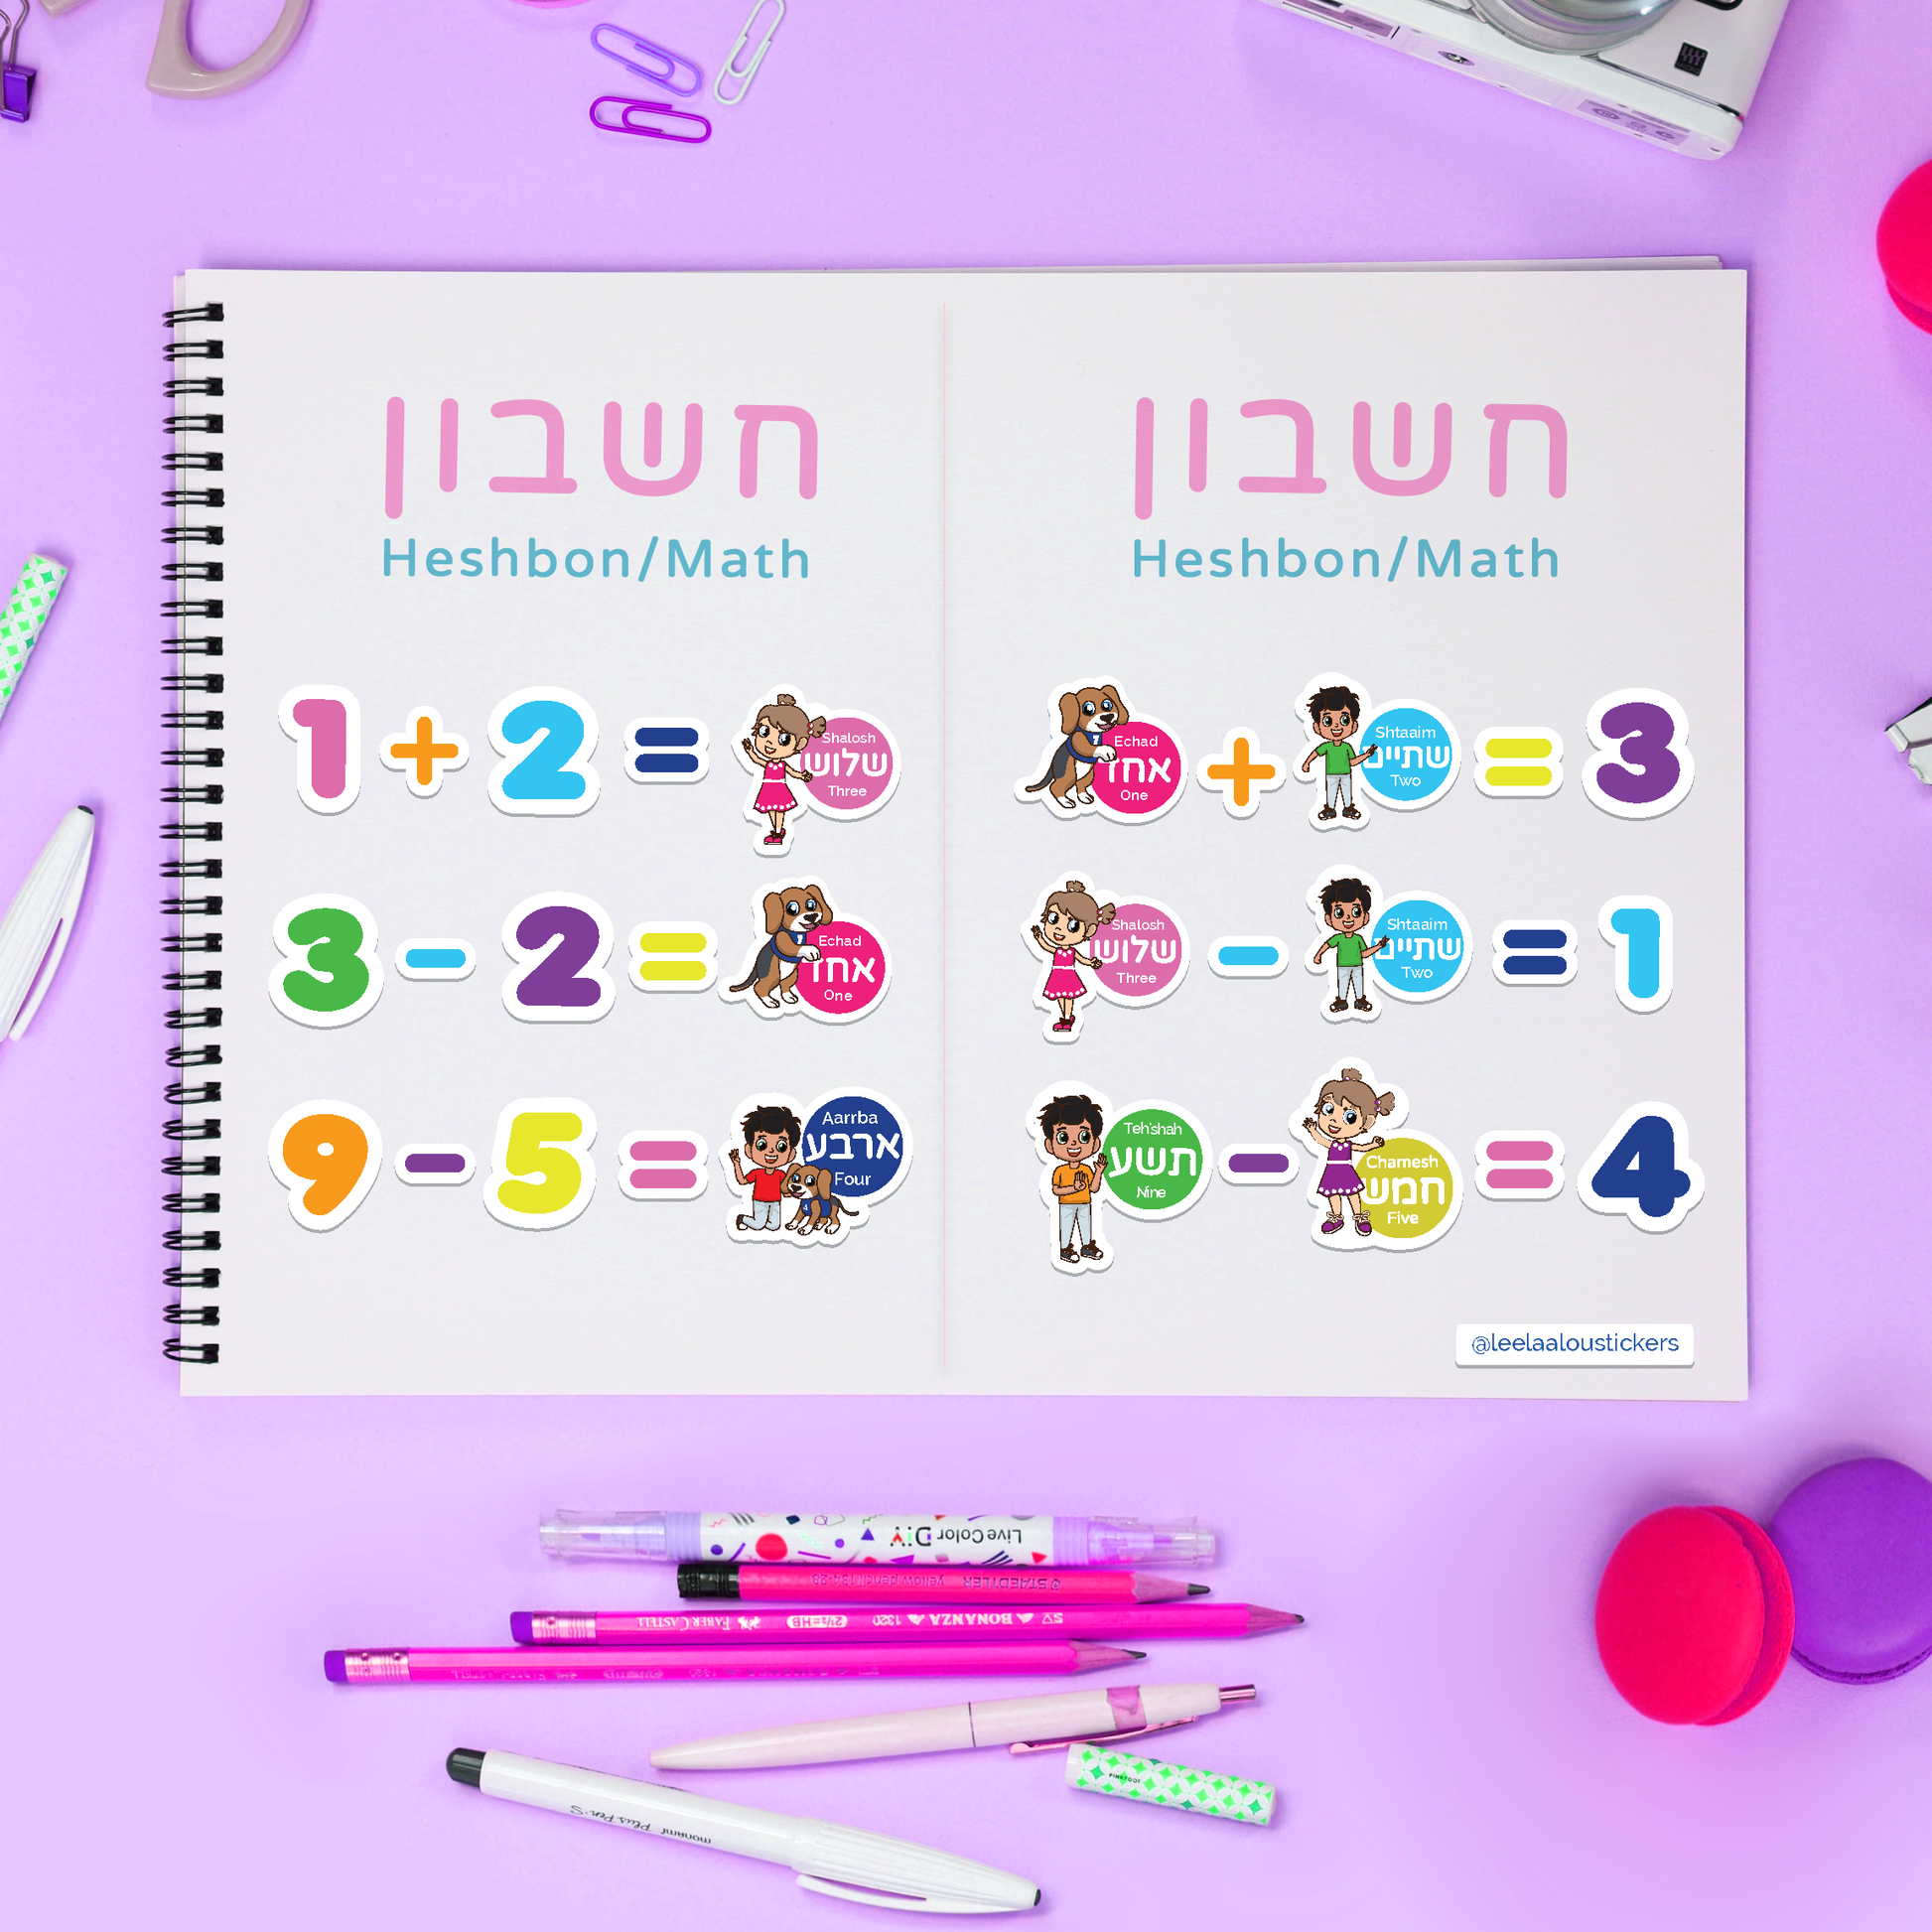 A great example of how to use number stickers in the classroom. Learn math and Hebrew at the same time.